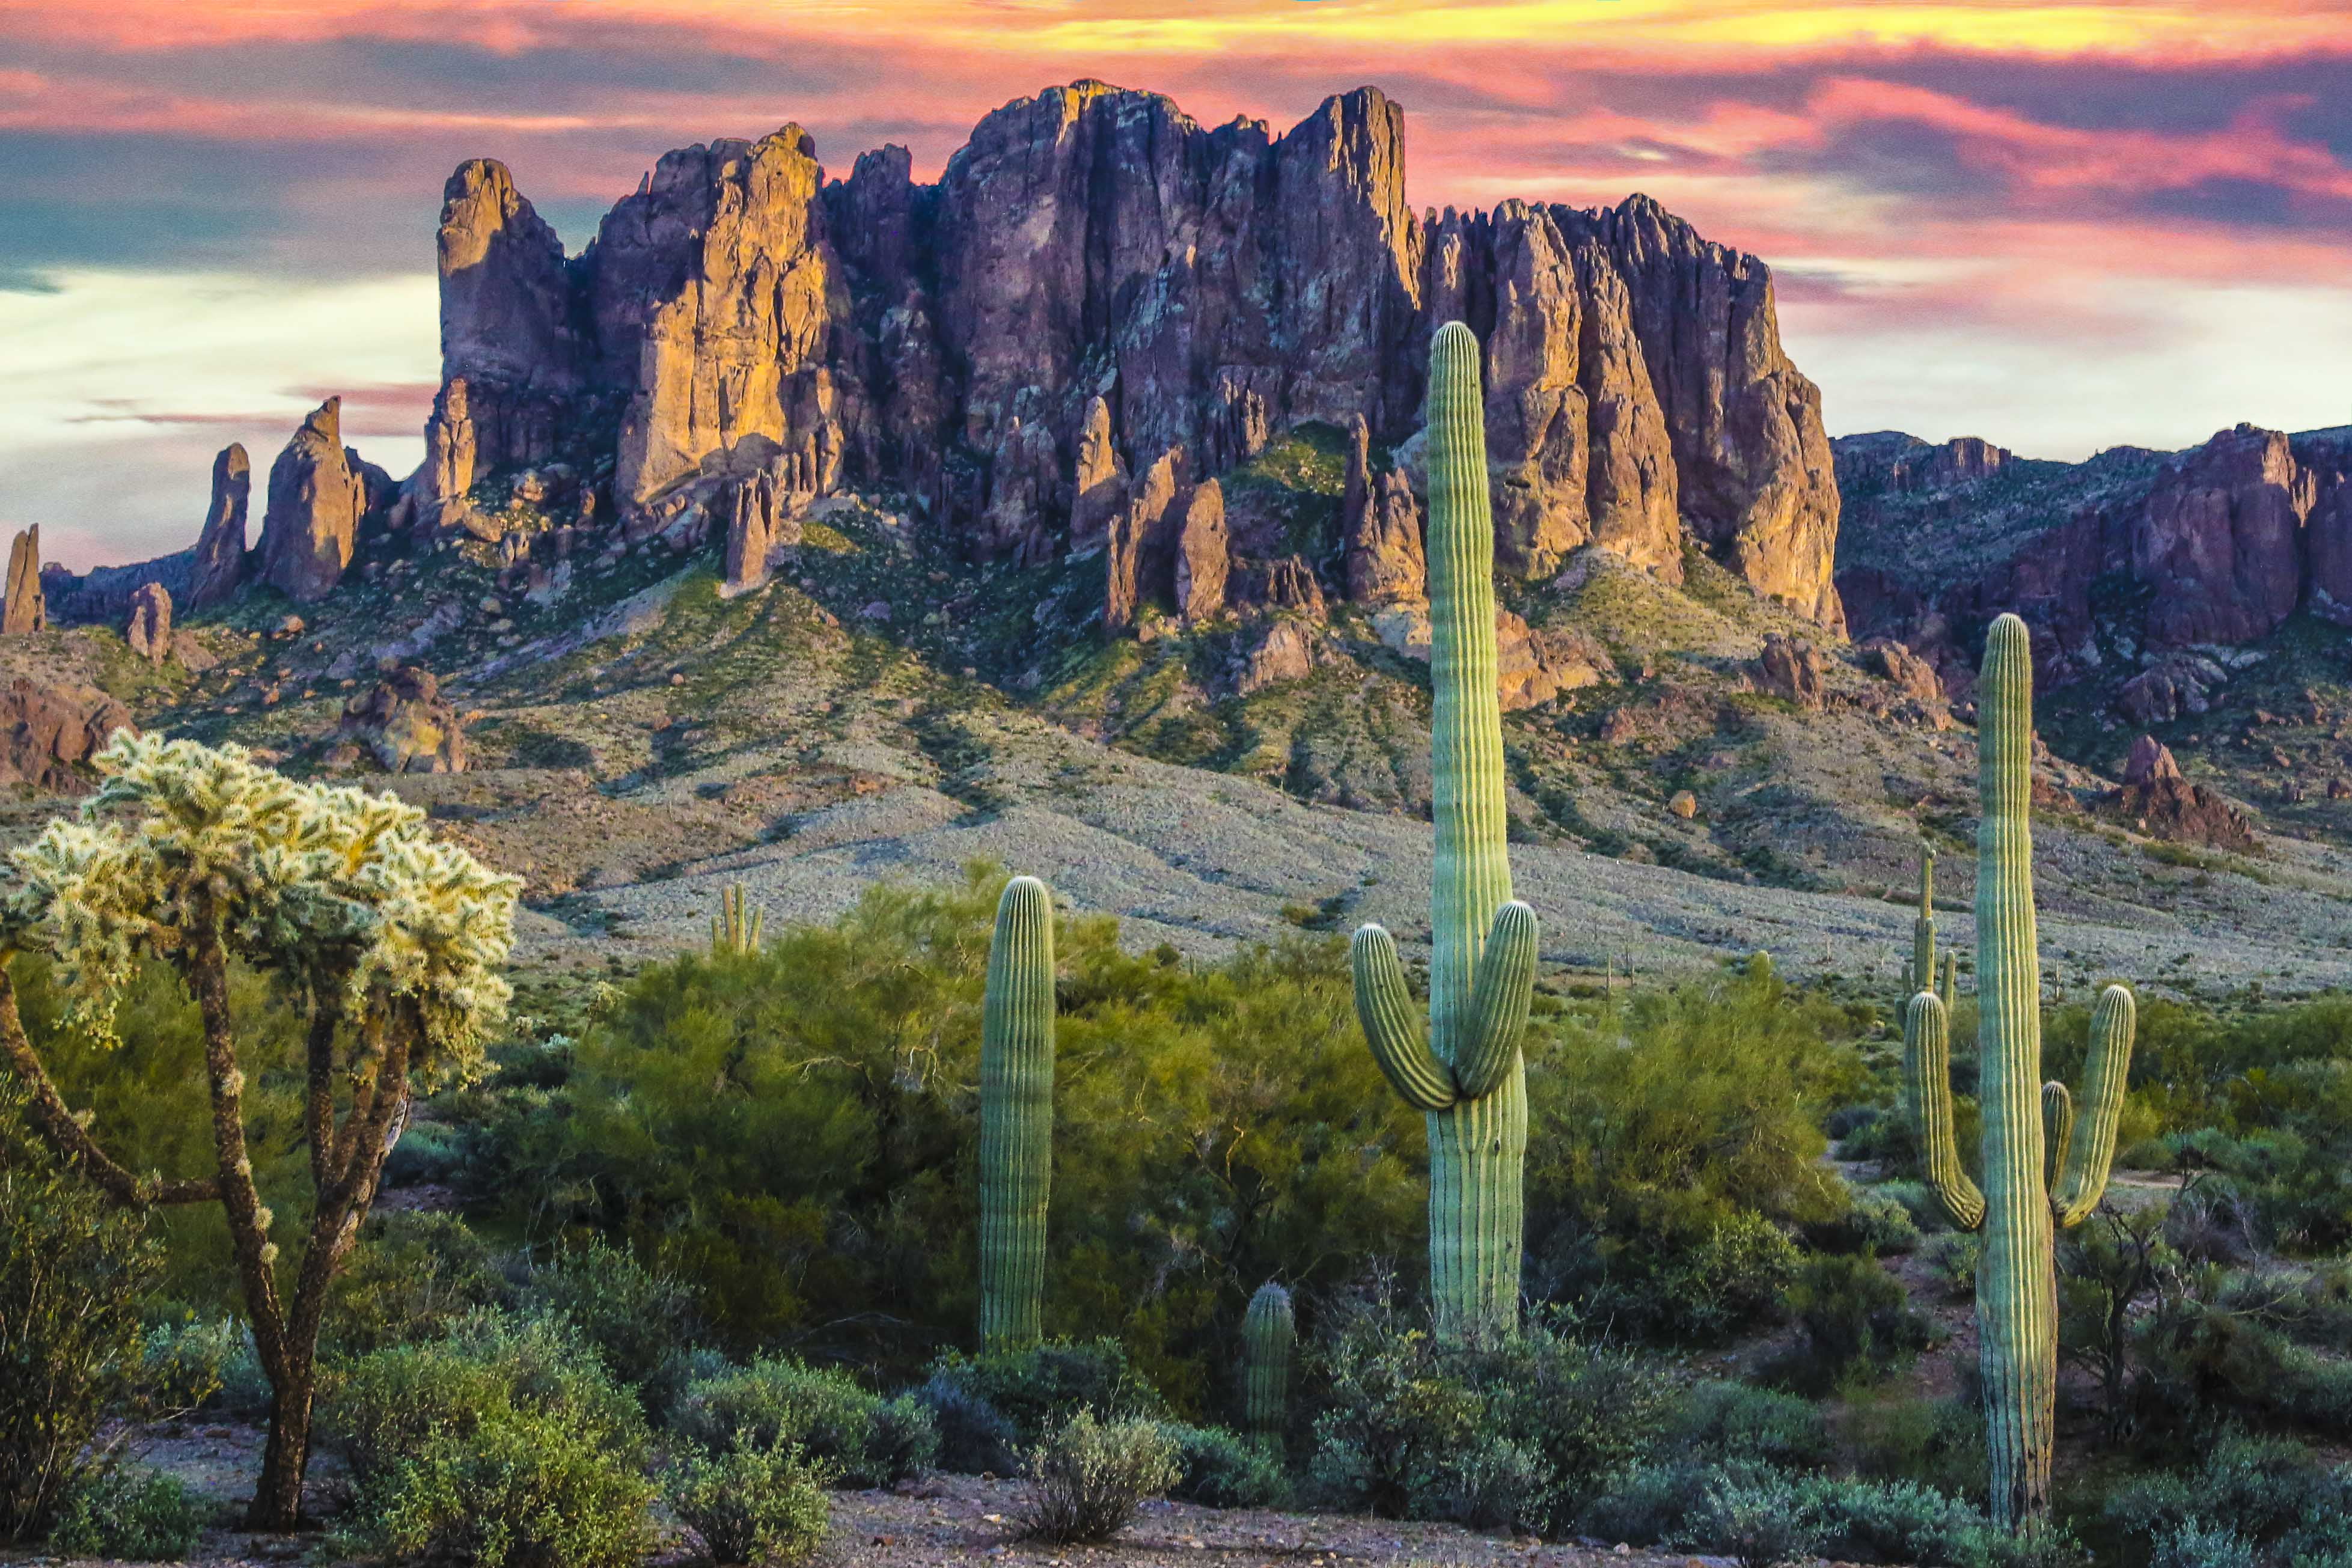 Landscape Photo Of Rock Mountain Superstition Mountains Hd Wallpaper